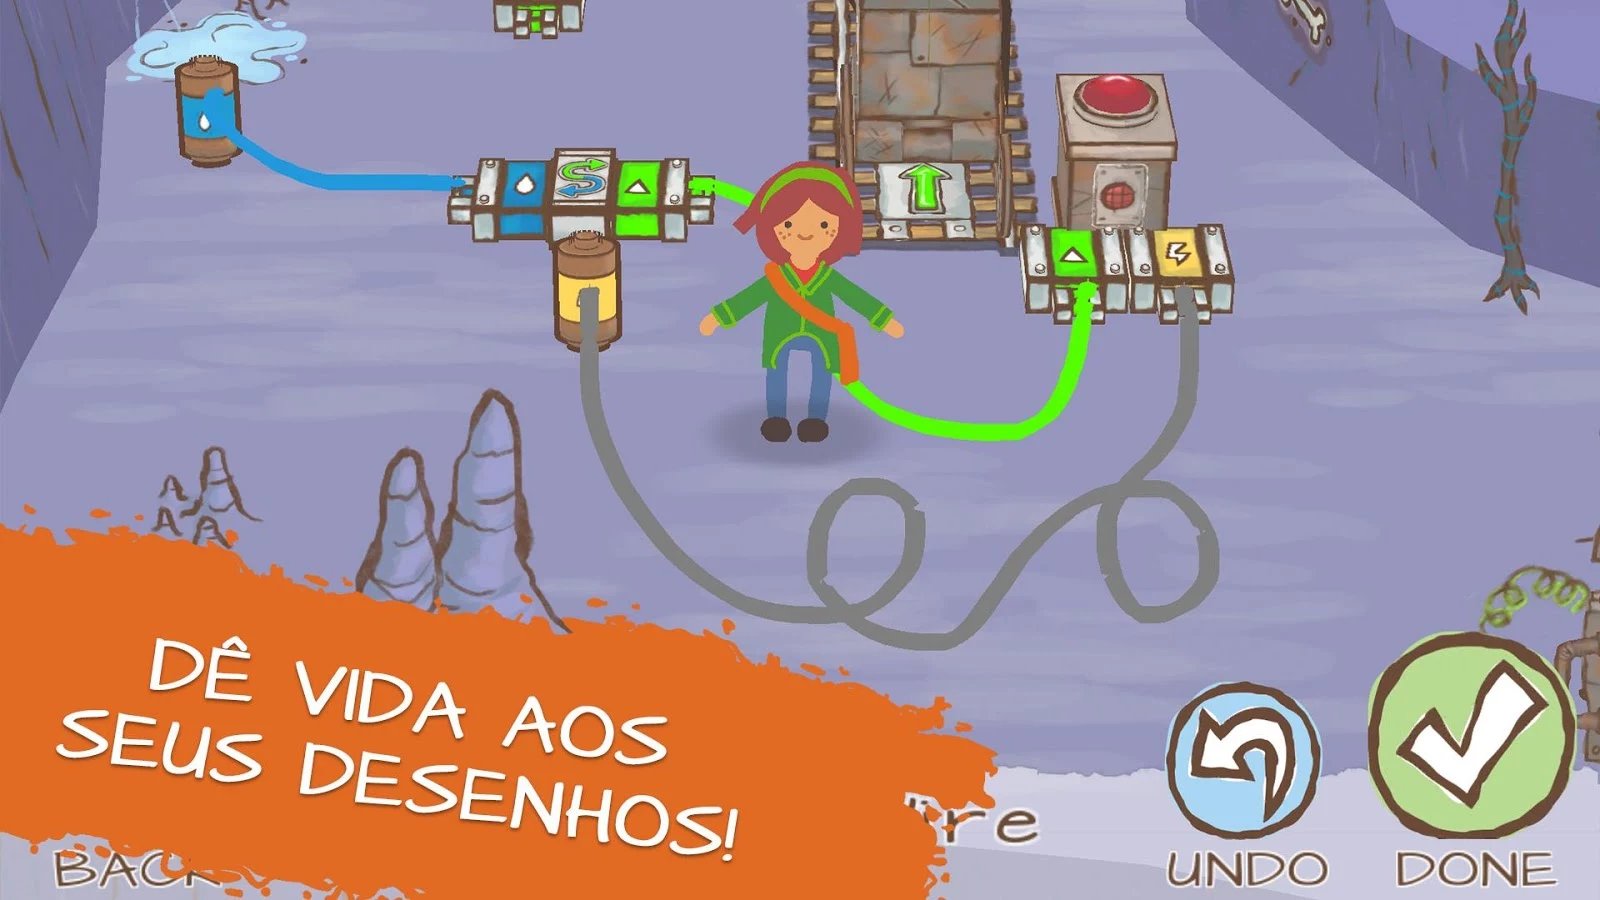 draw a stickman epic 2 apk full version for android 5.1.1